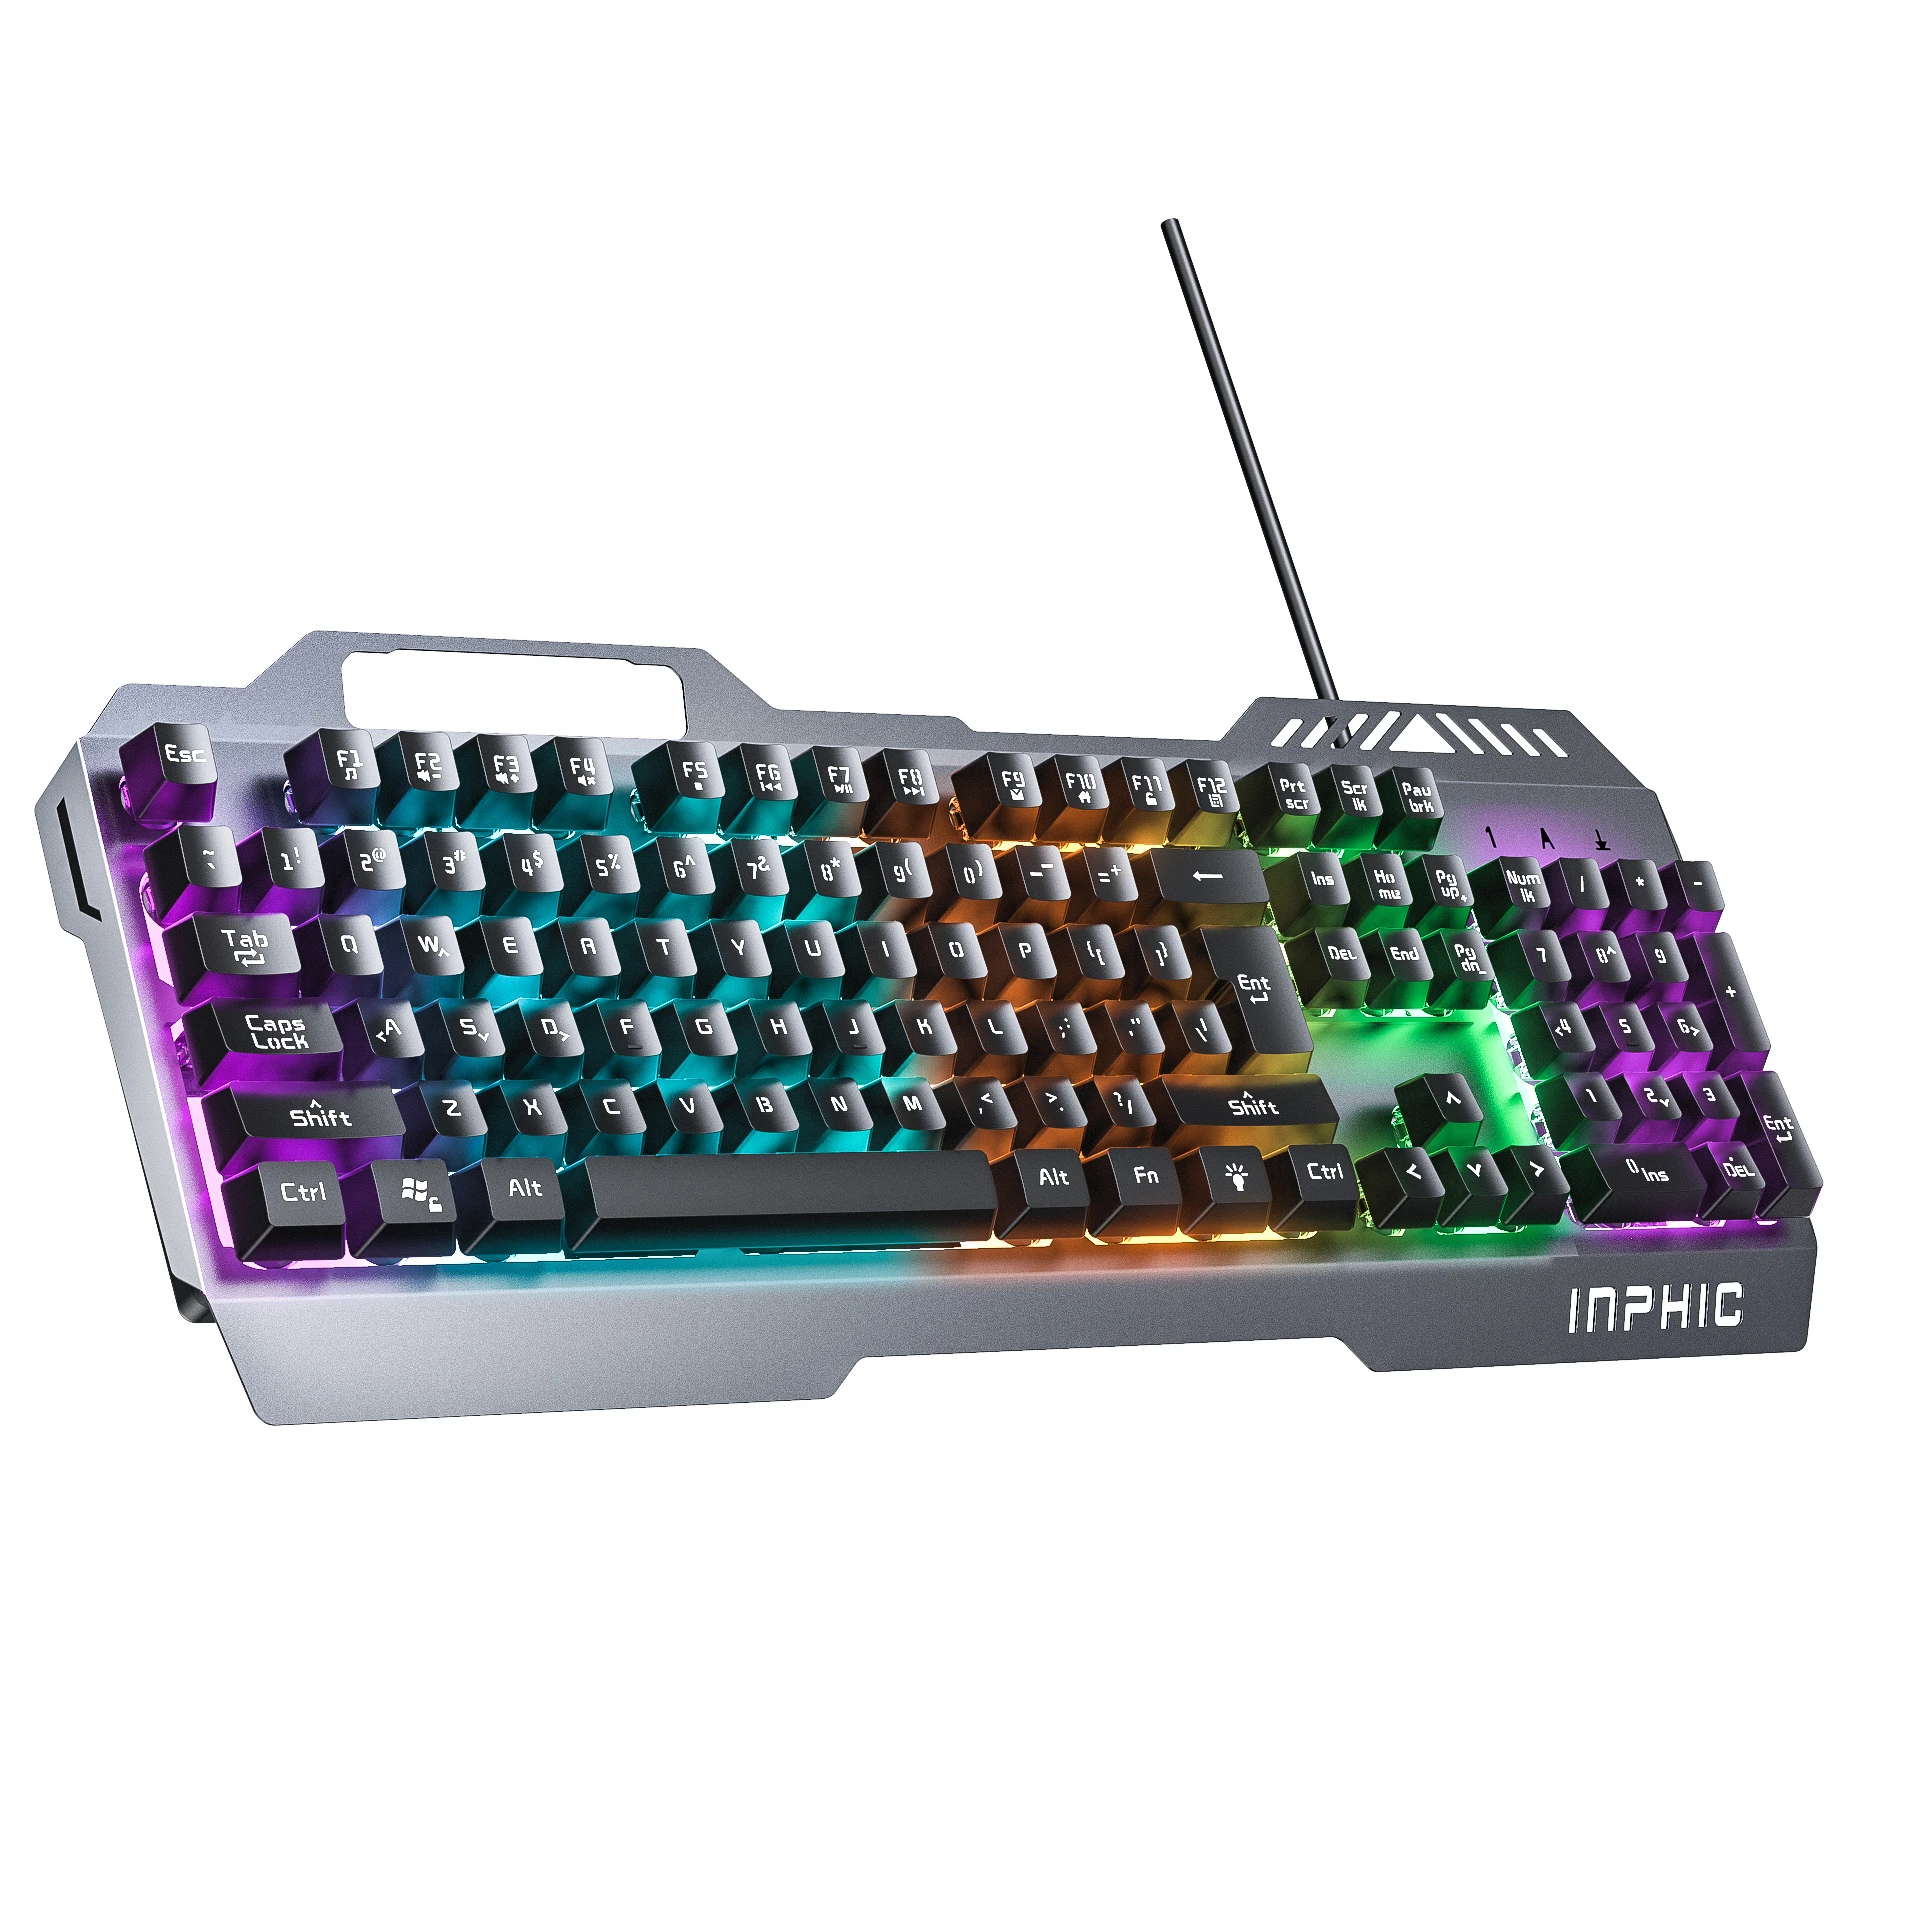 Amazon hot sale wired keyboard and mouse set LED wired manipulator keyboard and mouse set game keyboard and mouse combination